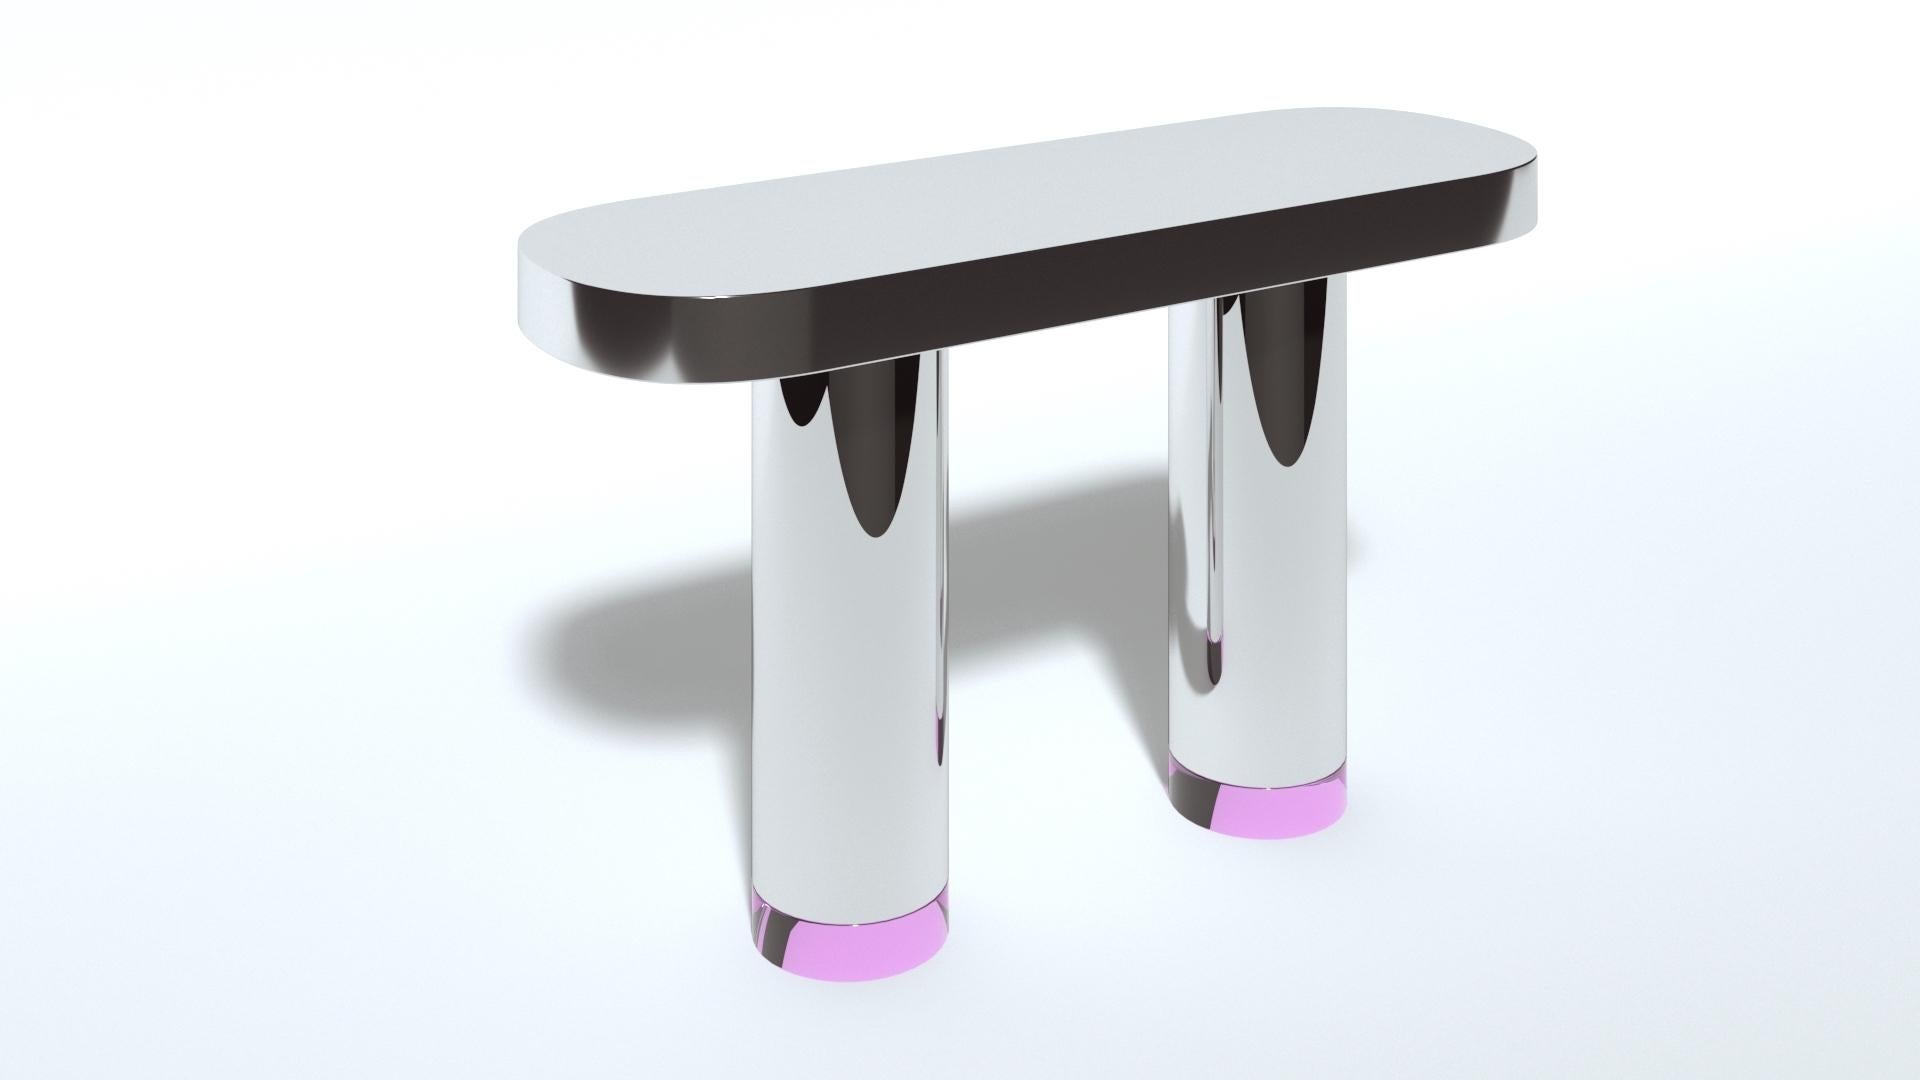 Dolmen model console table, legs and top in stainless steel and feet of the two legs in colored plexiglas designed by Studio Superego for Superego Editions. Limited edition of 9 pieces.

Biography:
Superego editions was born in 2006, performing a